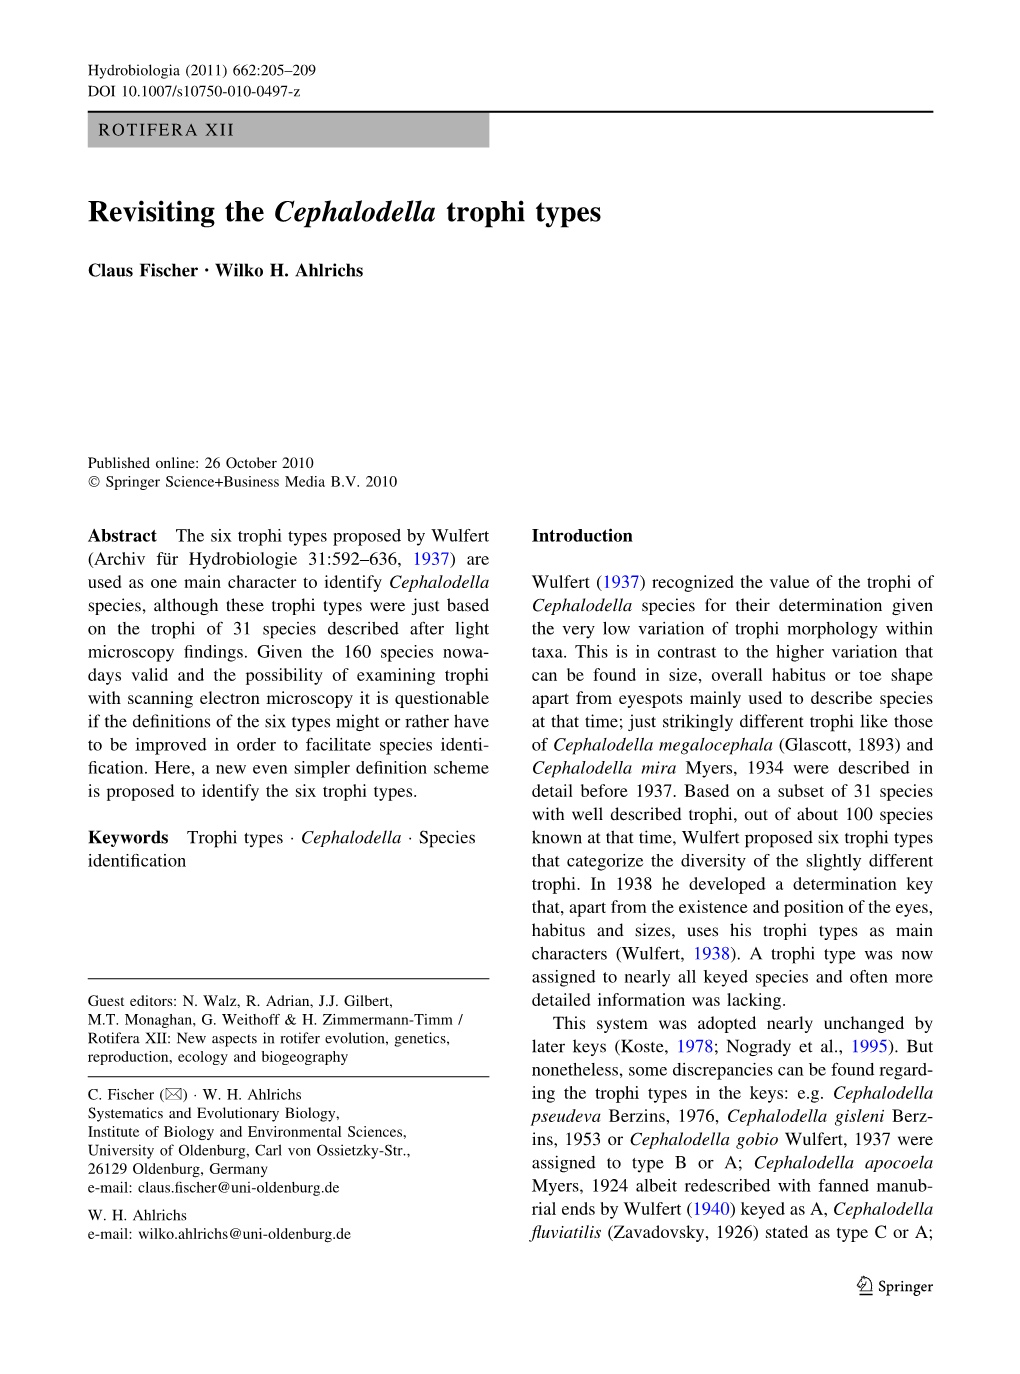 Revisiting the Cephalodella Trophi Types